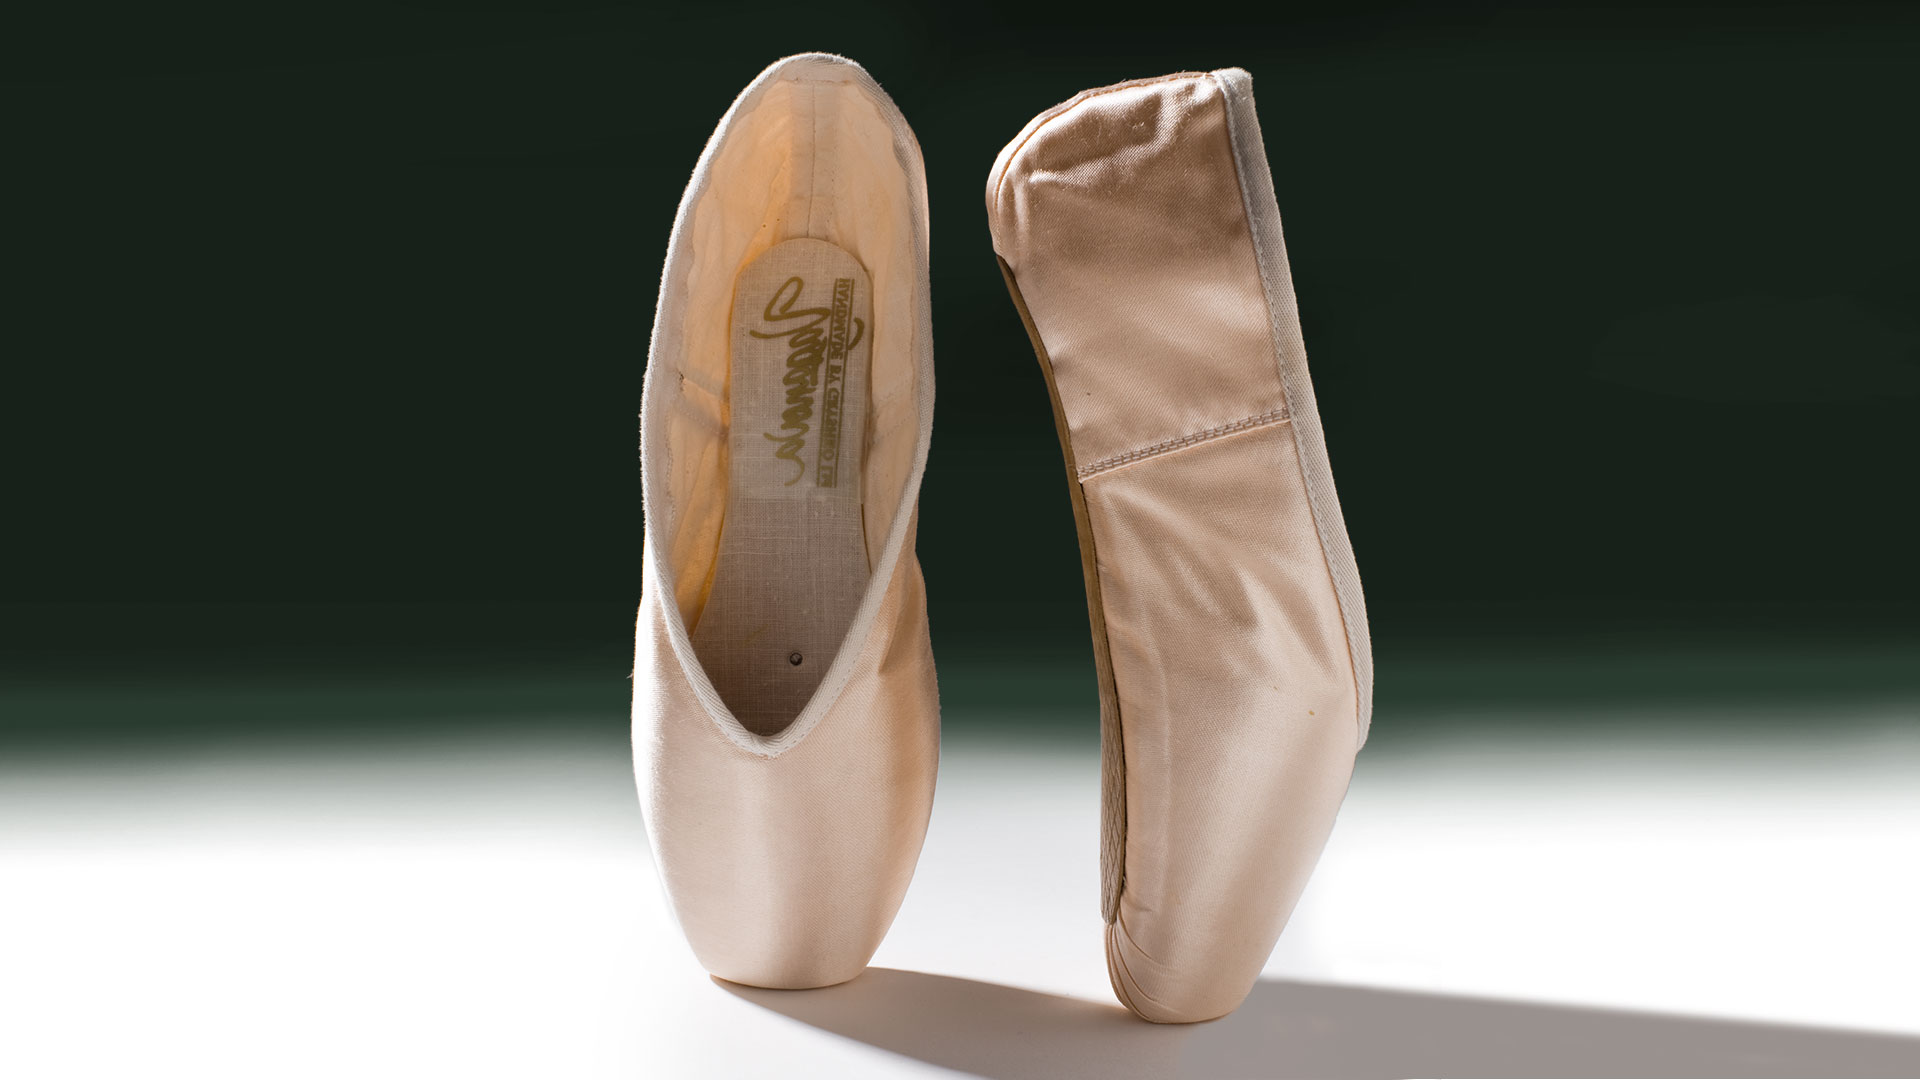 On Pointe: The Rise of the Ballet Shoe